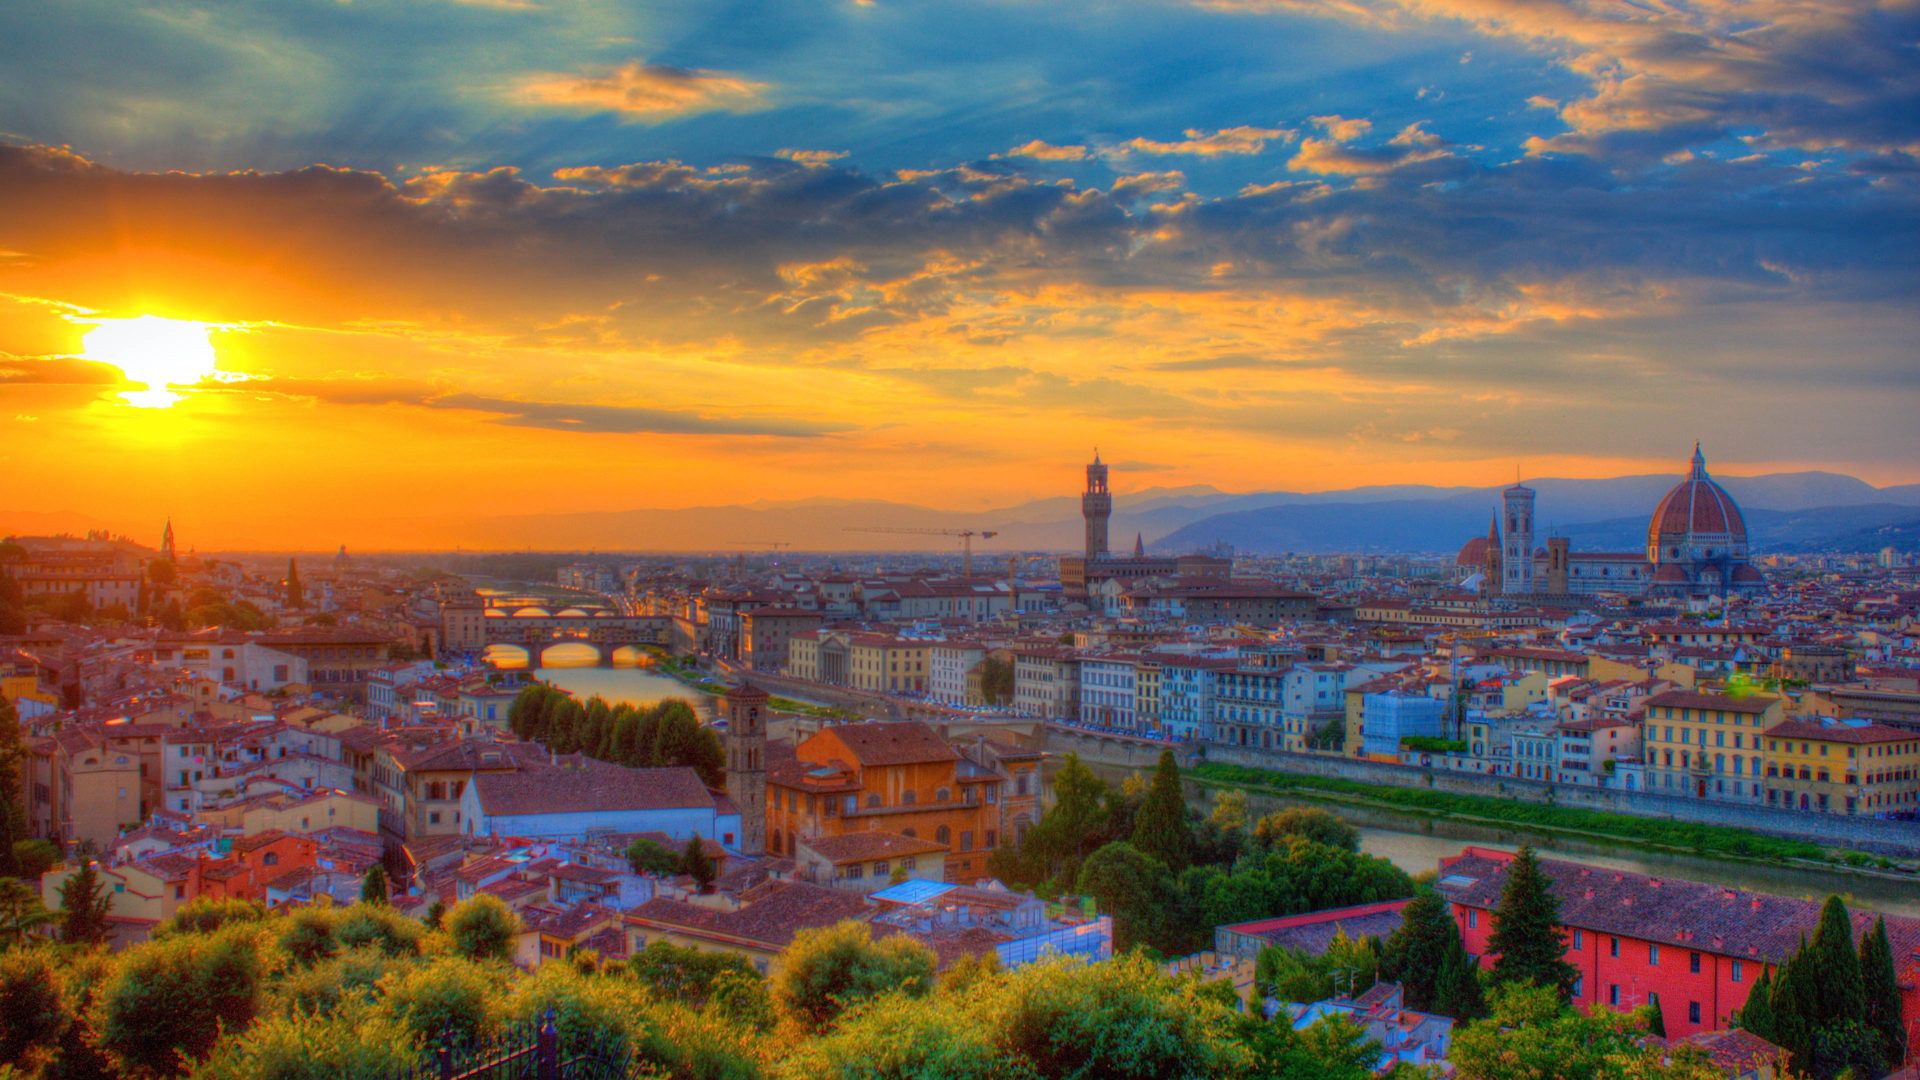 Piazzale Michelangelo Plaza In Florence Italy Sunset Landscape Photo Wallpaper HD, Wallpaper13.com